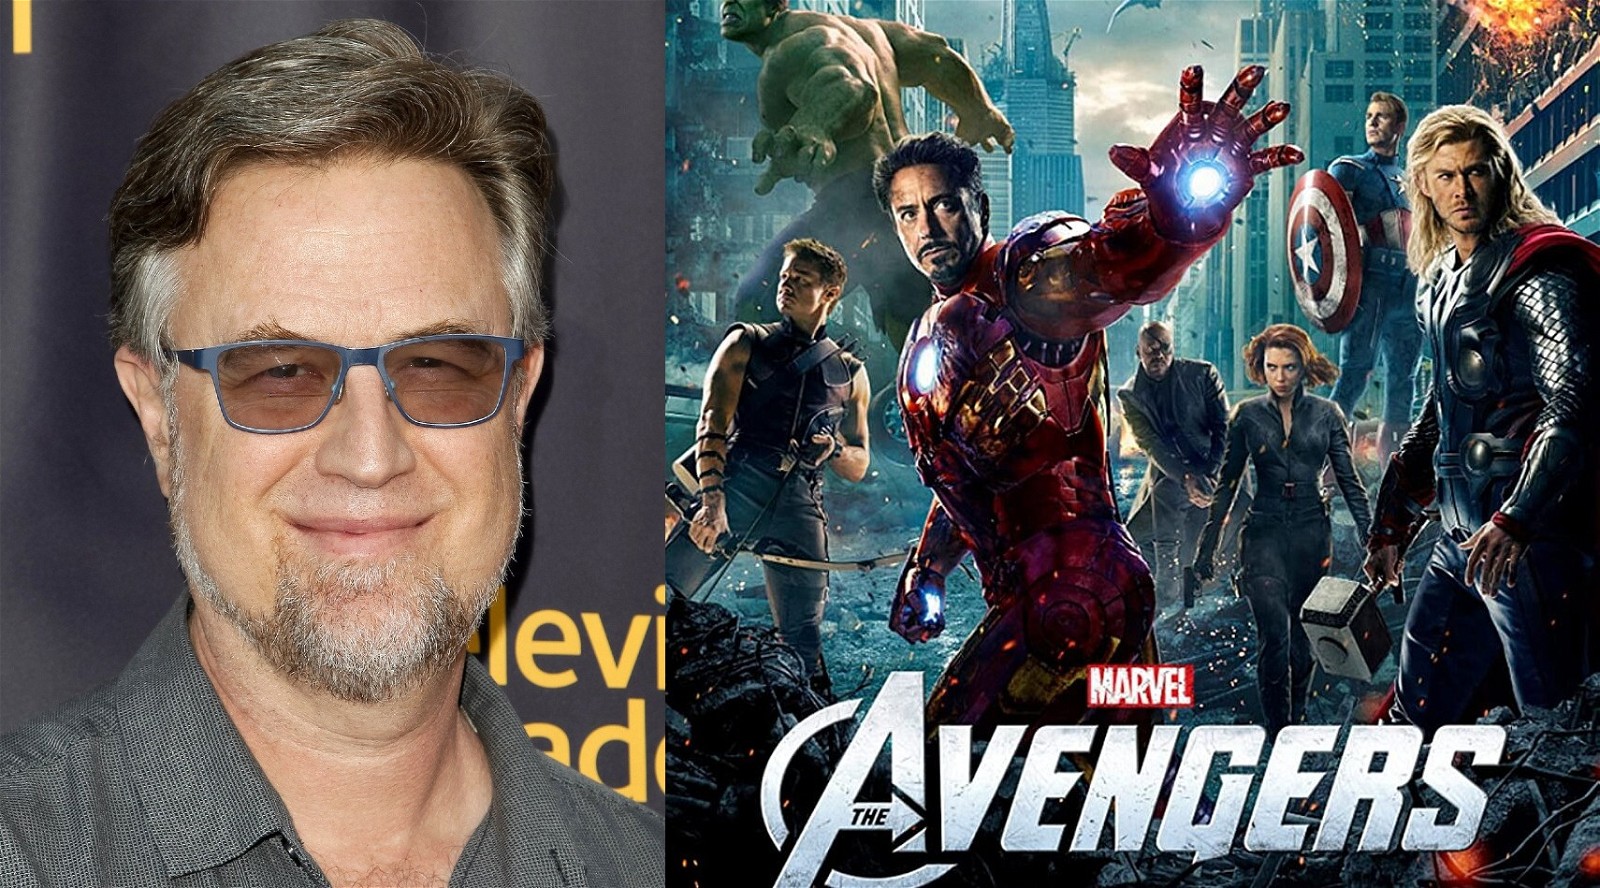 Dan Povenmire's take on The Avengers sharing similarities with his animated show